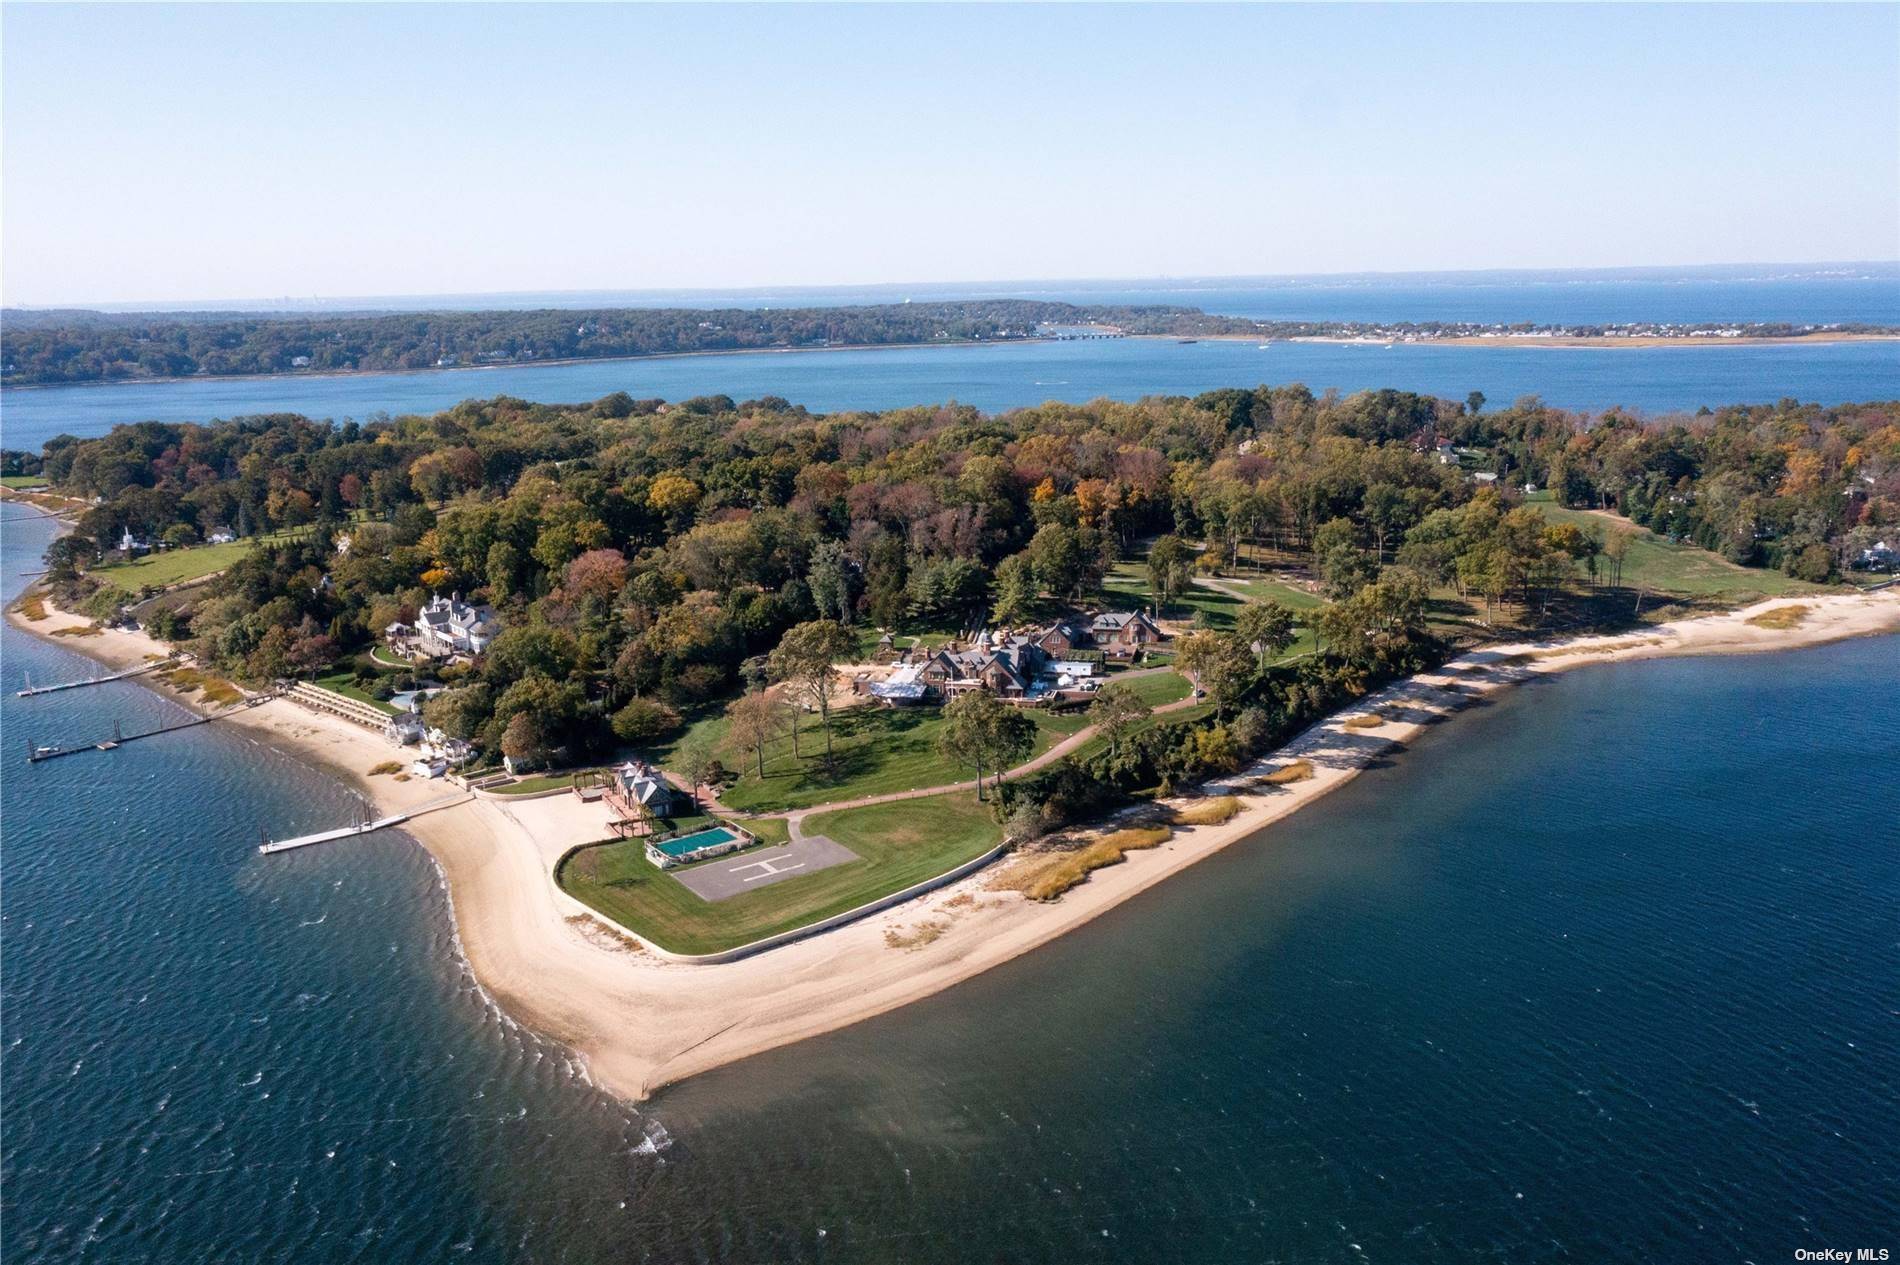 This is an EXTRAORDINARY one of a kind Waterfront estate on over 26 acres with 2000 ft of waterfront on Oyster Bay Harbor.